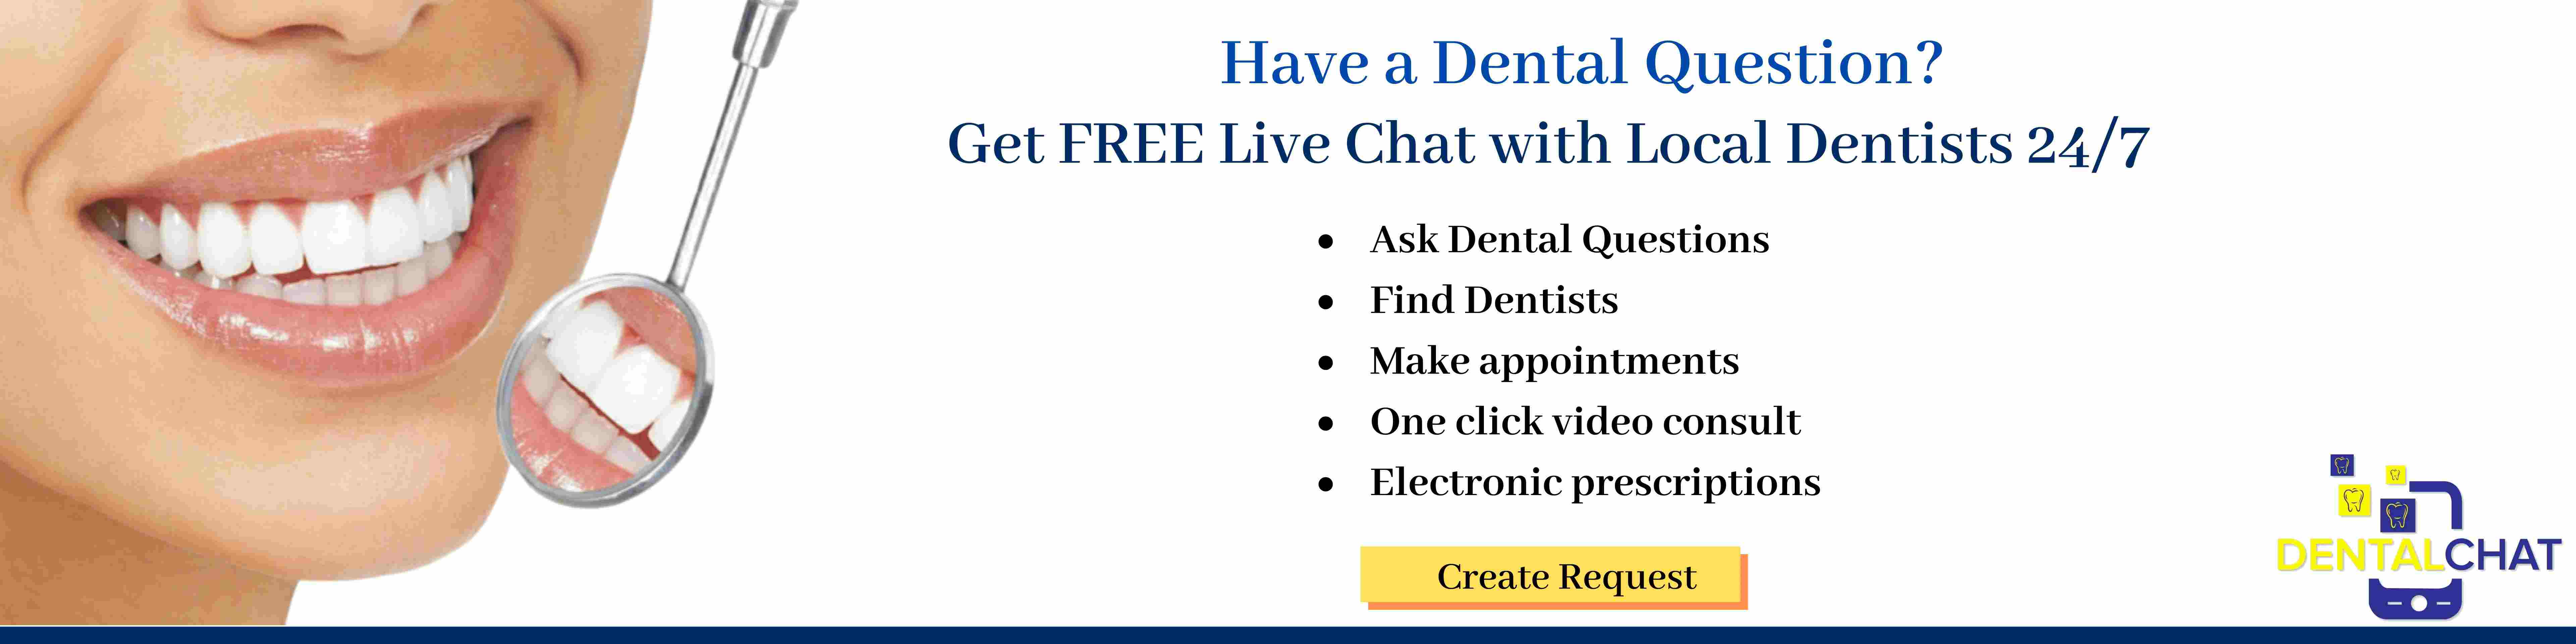 Local dental problem teledentistry answers, and online dental pain teledentist question